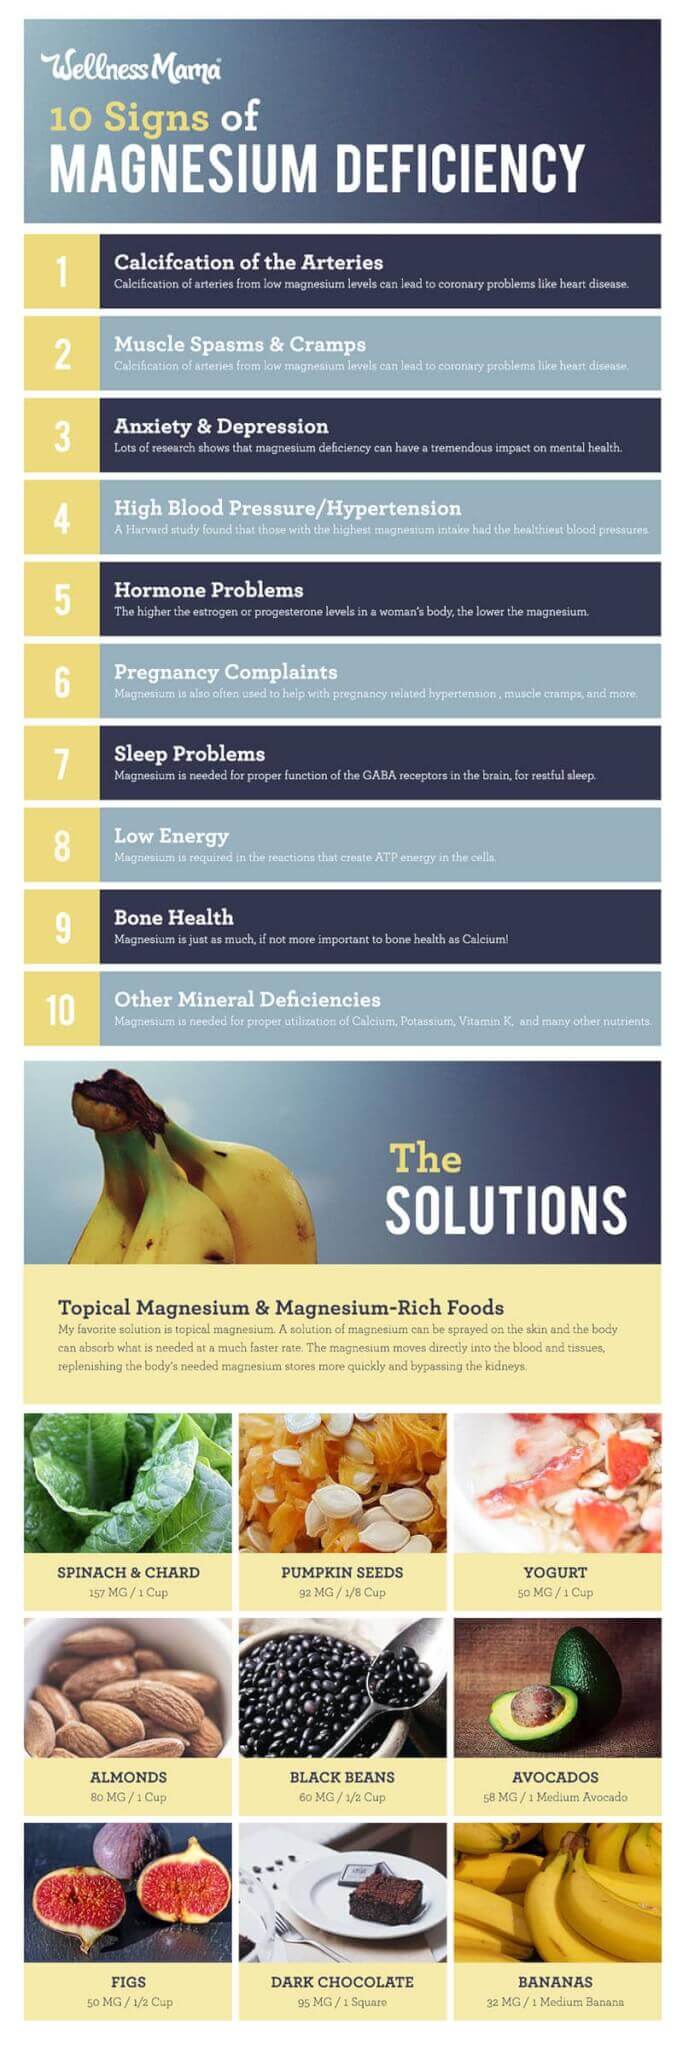 10 Signs Of Magnesium deficiency